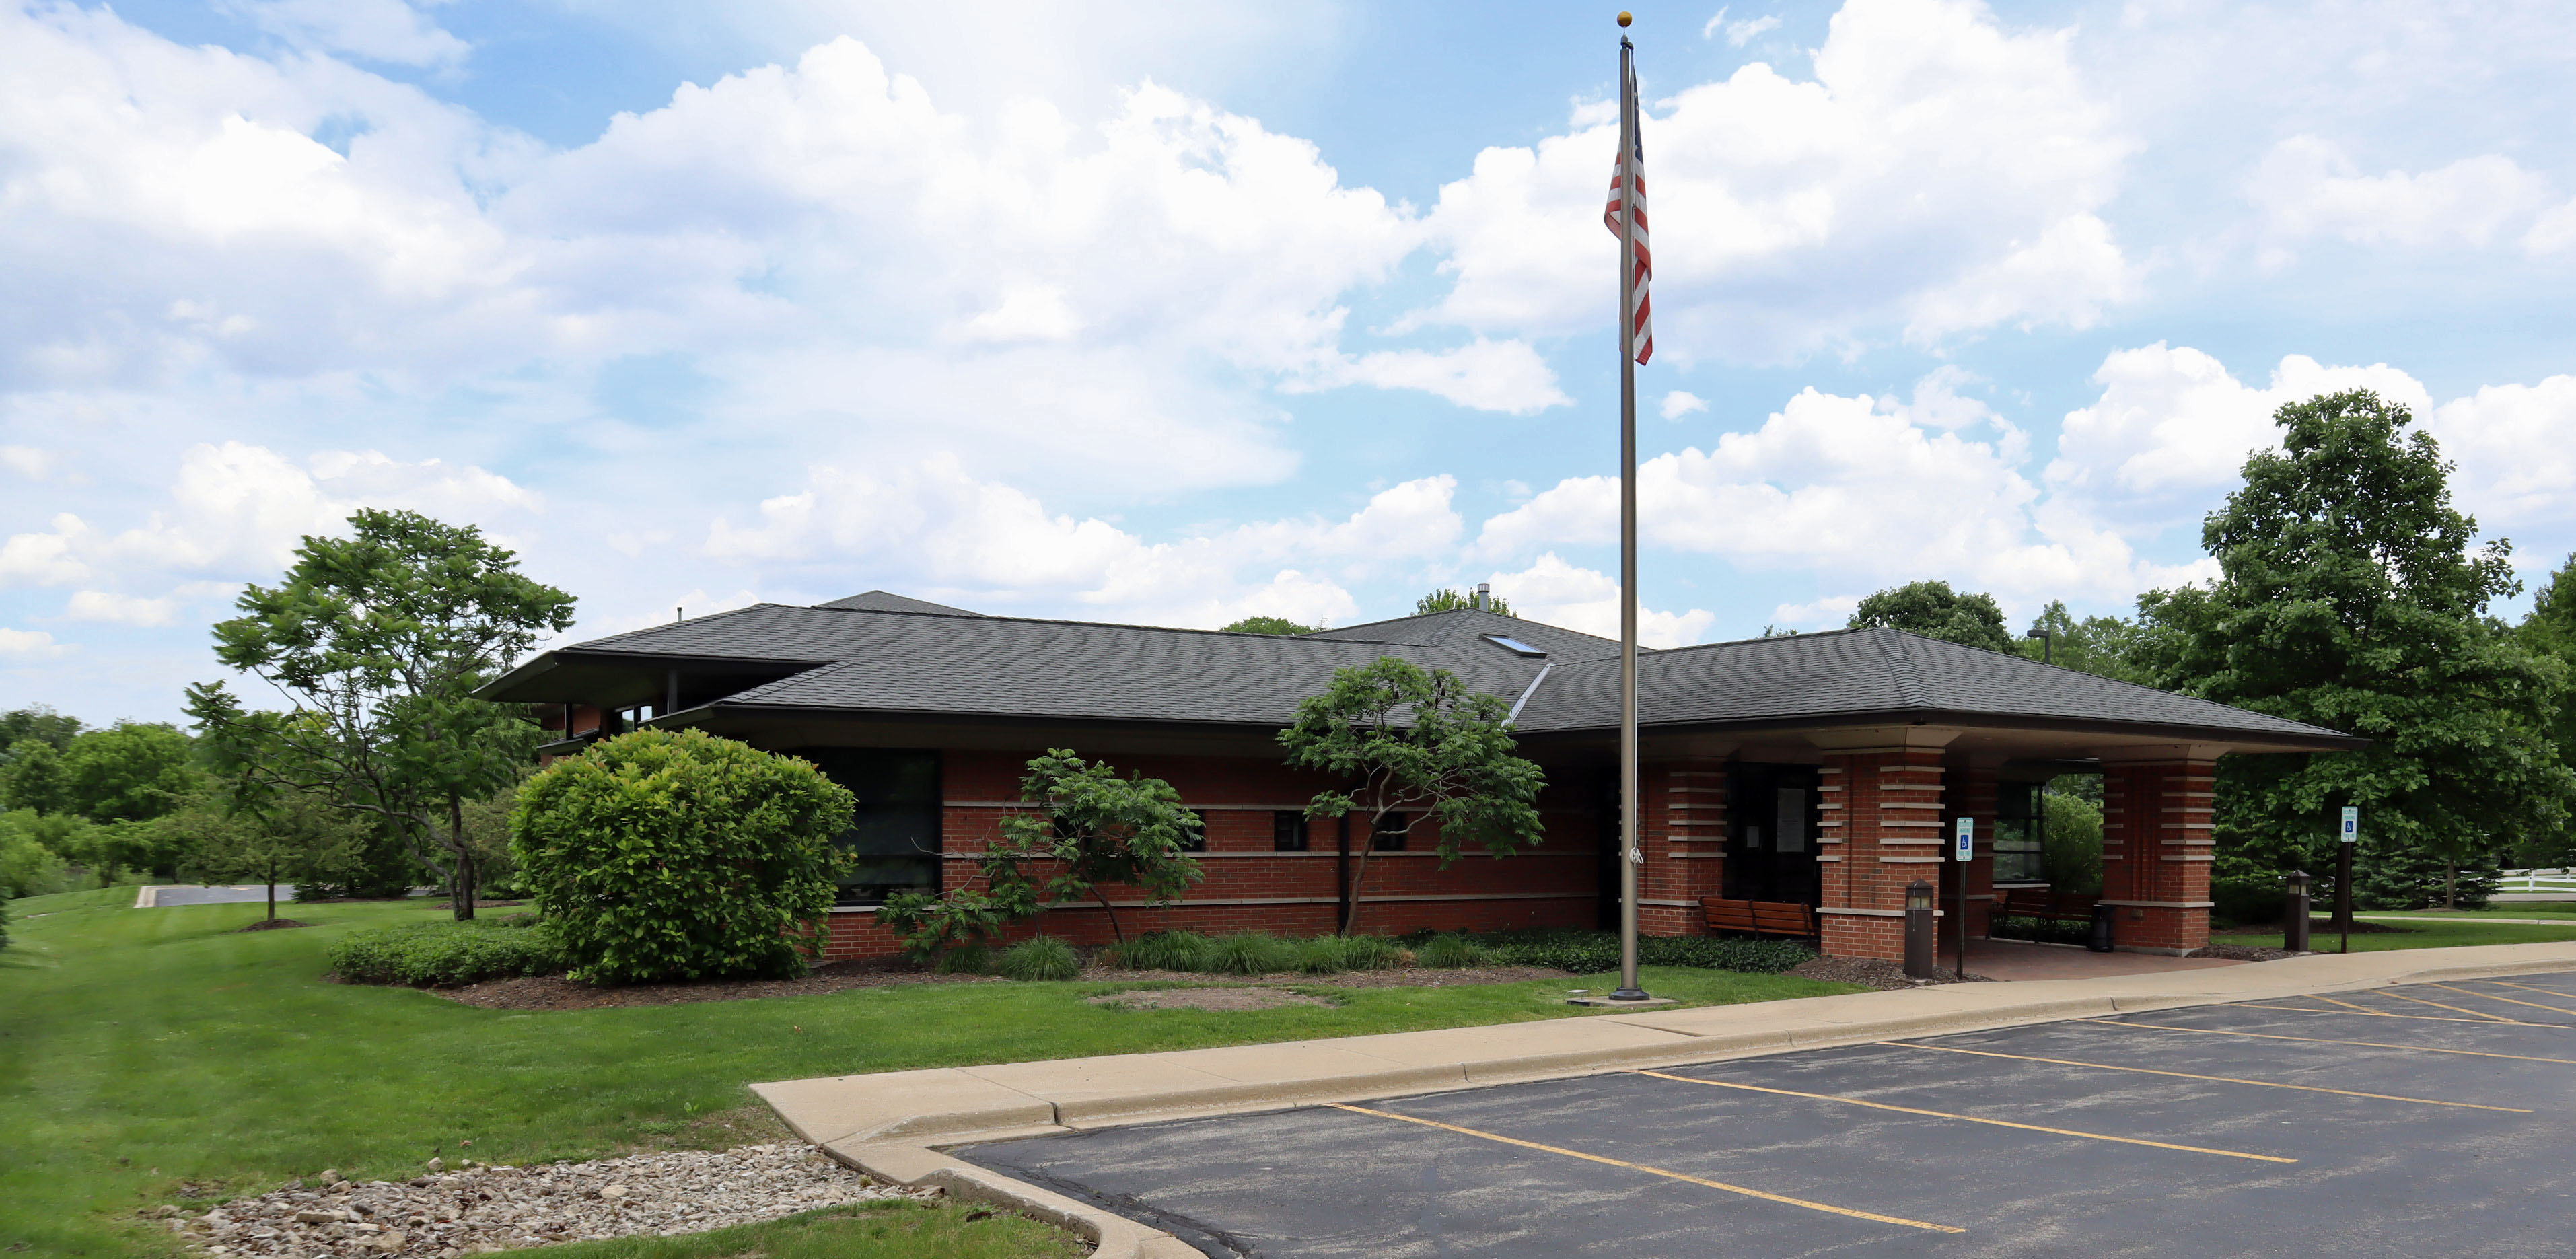 Commercial Site – 10,624 Sq. Ft. — 25700 W. Old Grand Ave., Ingleside, IL